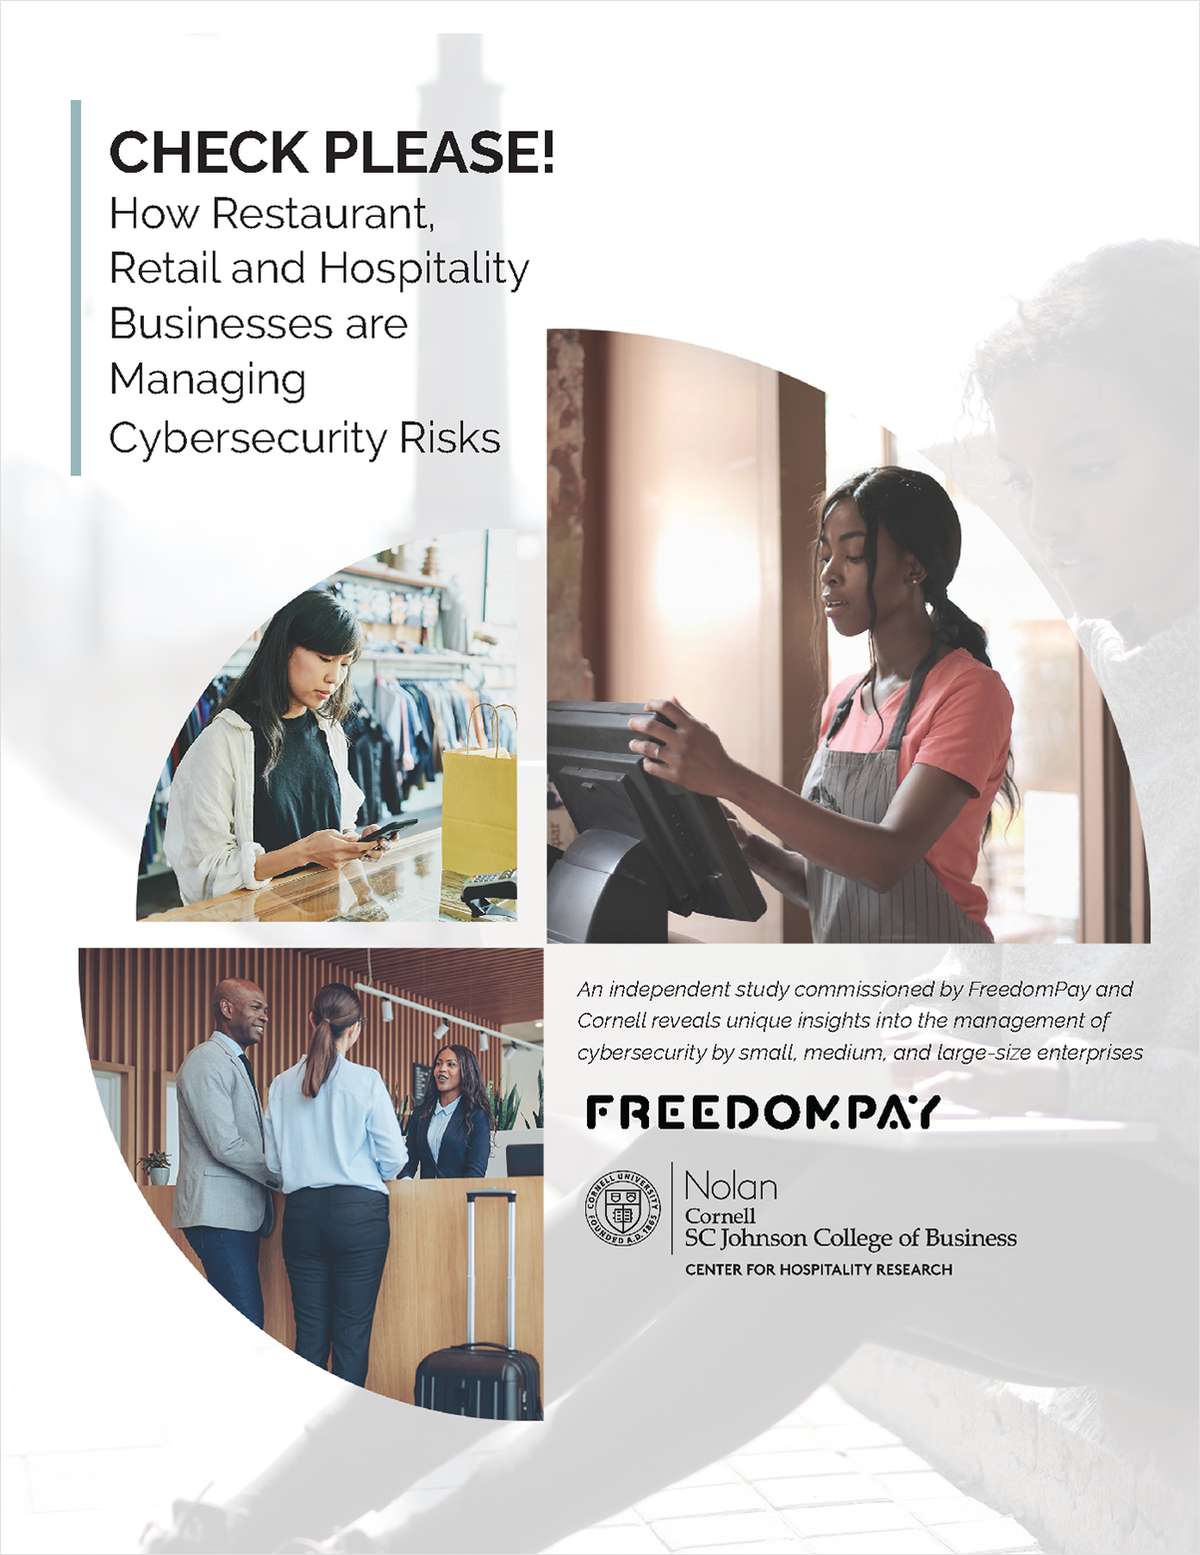 Check Please! How Restaurant, Retail and Hospitality Businesses are Managing Cybersecurity Risks